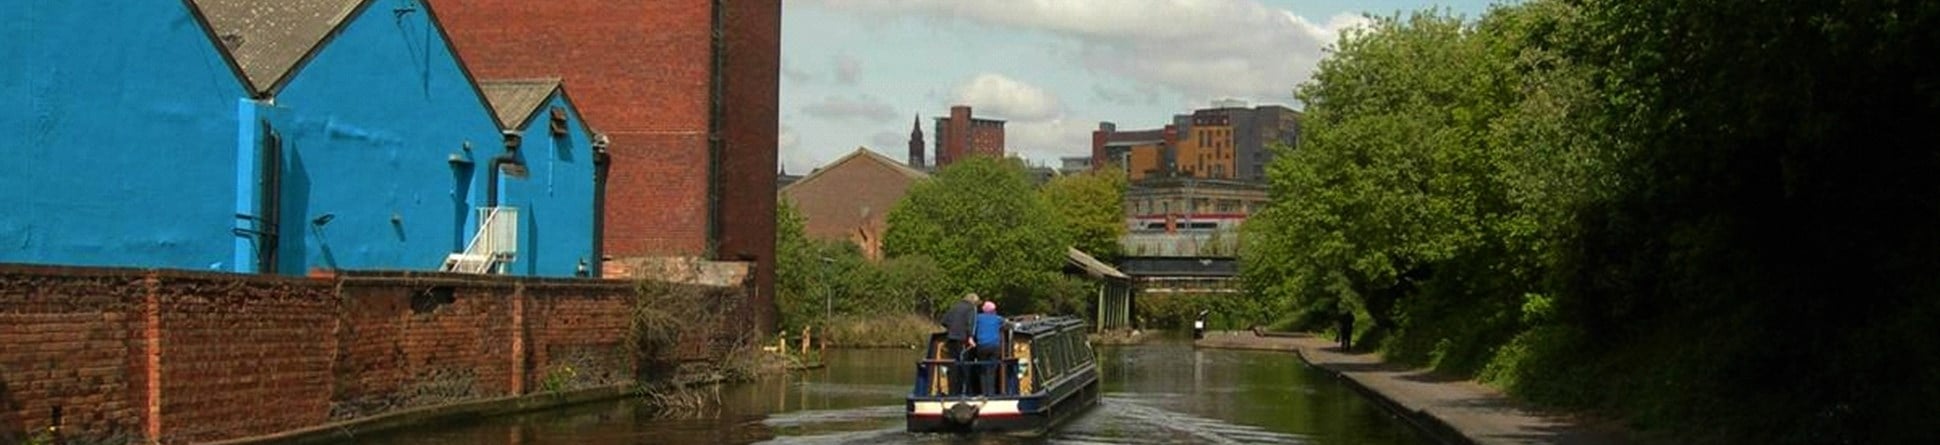 View along a canal in Birmingham, with canal boat and industrial buildings.